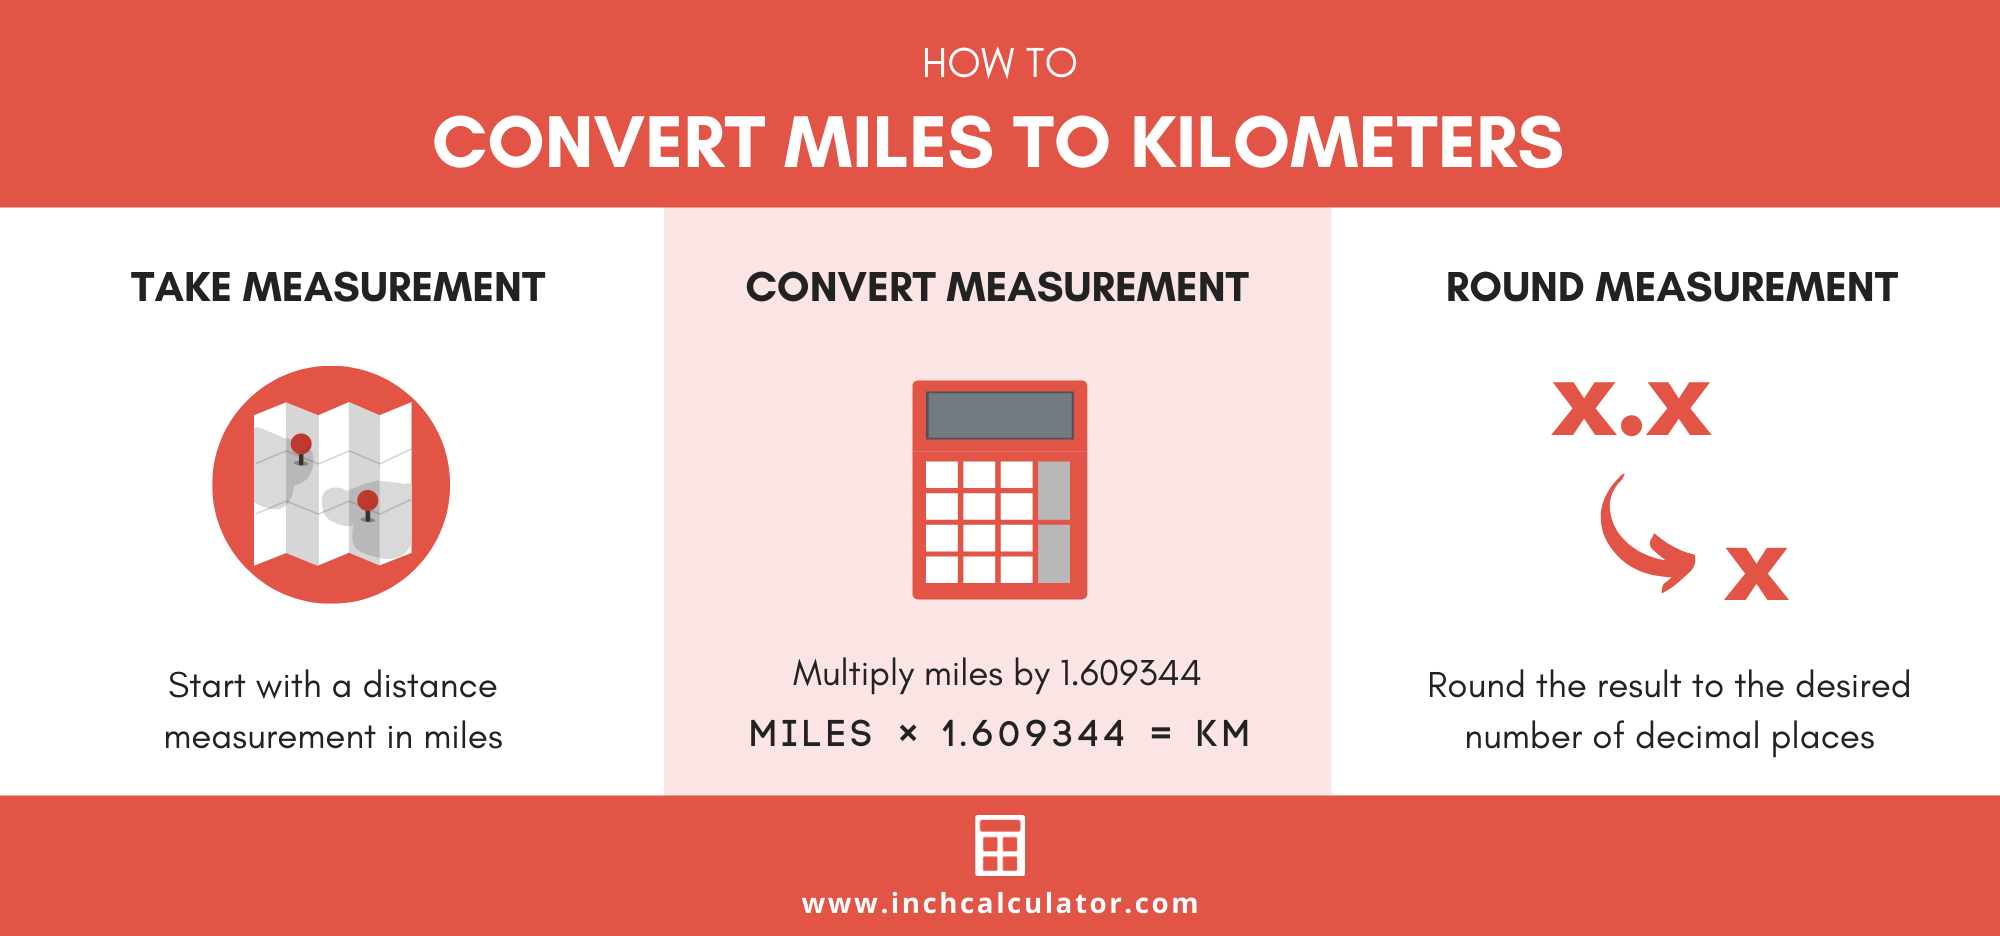 infographic showing how to convert miles to kilometers